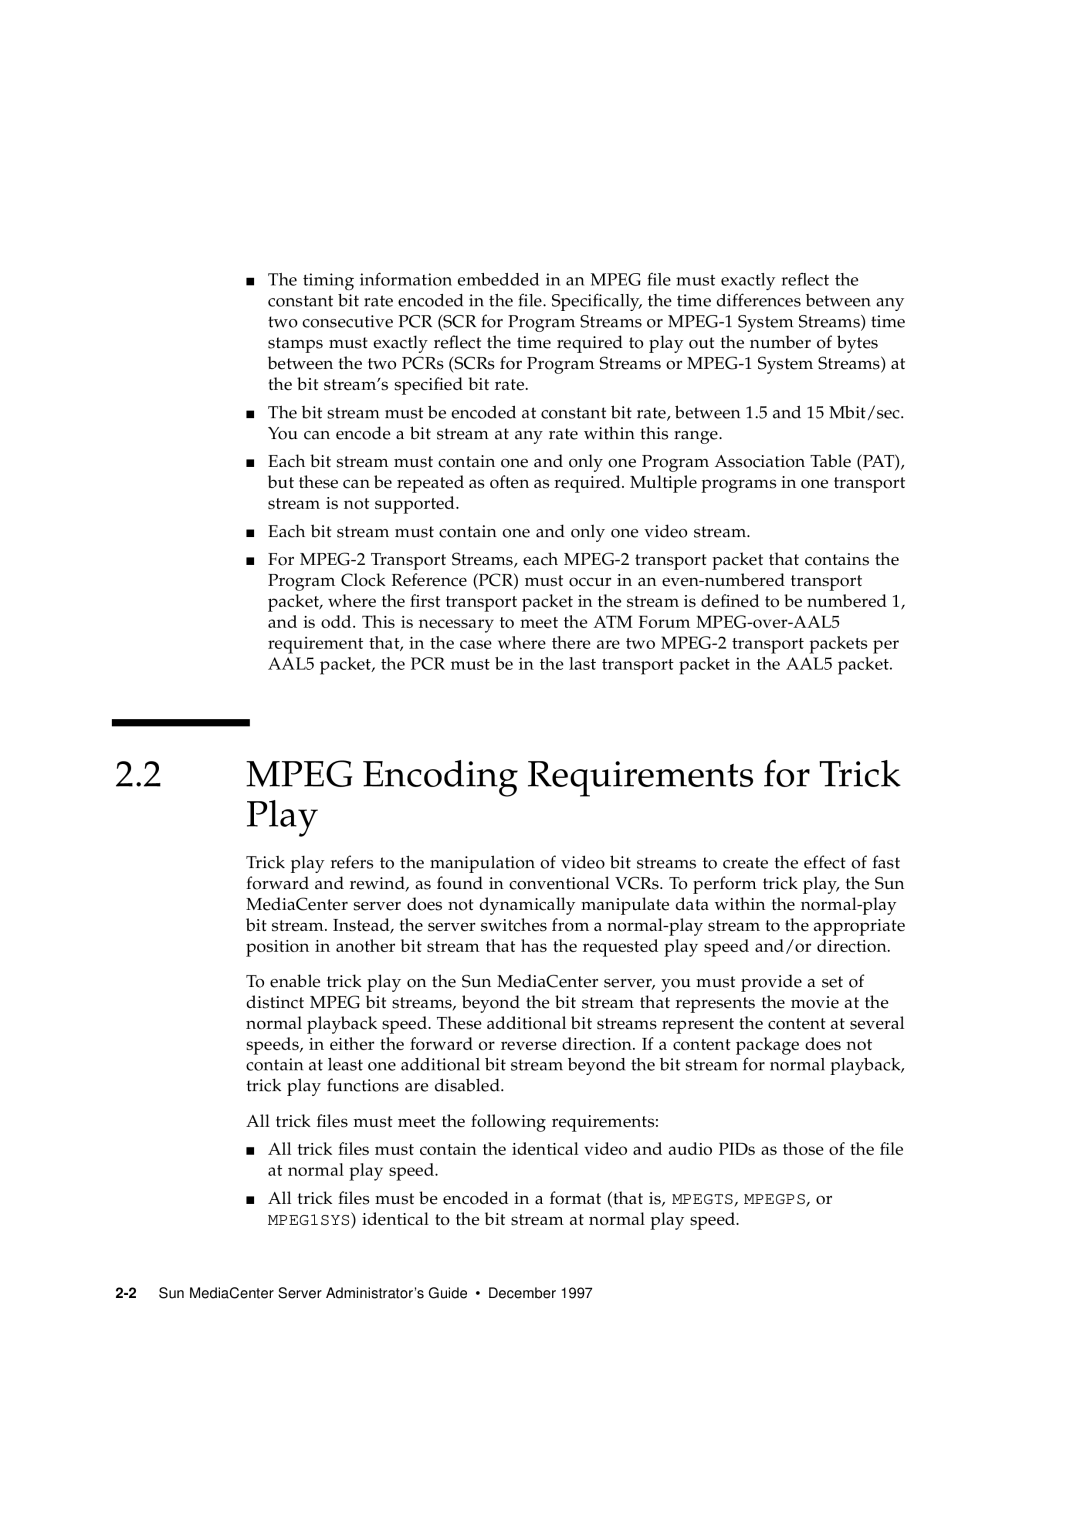 Sun Microsystems 2.1 manual MPEG Encoding Requirements for Trick Play 